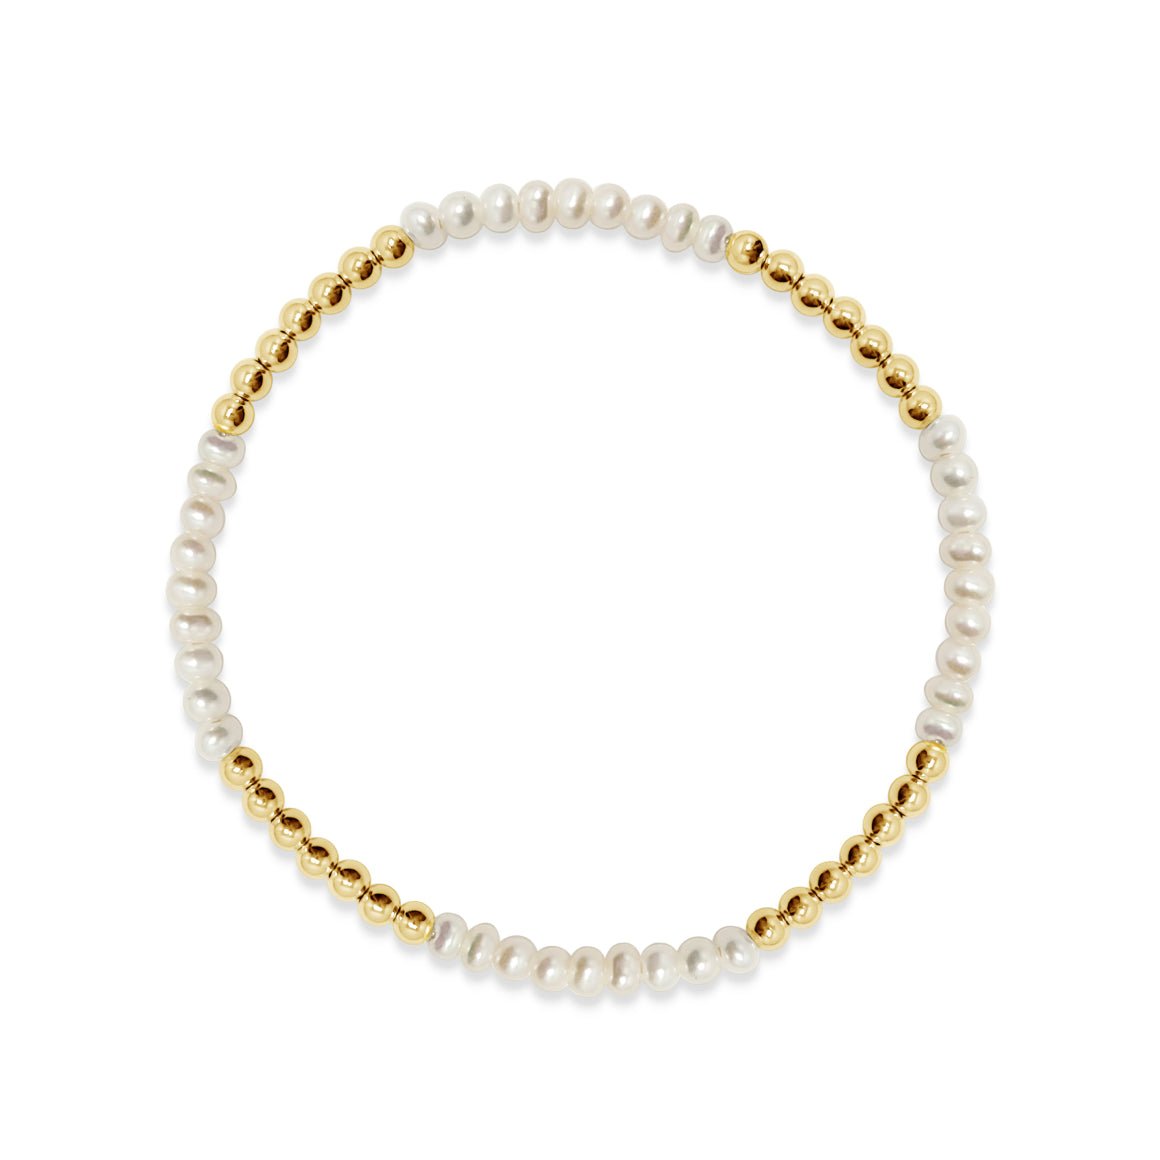 Freshwater Pearl and Bead Bracelet for Women